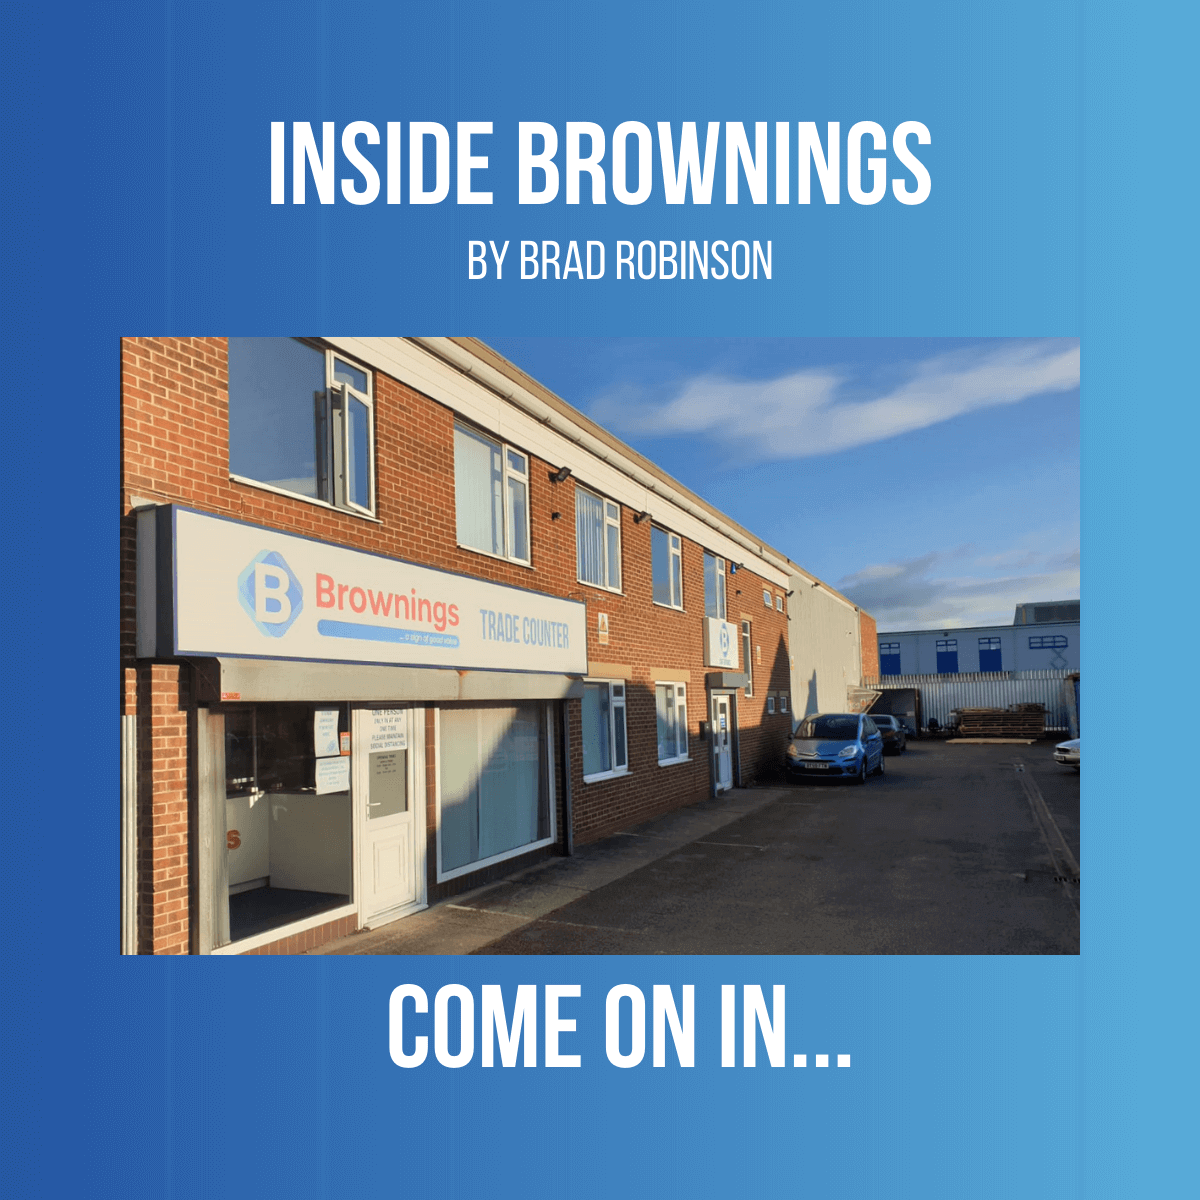 Brownings from within!